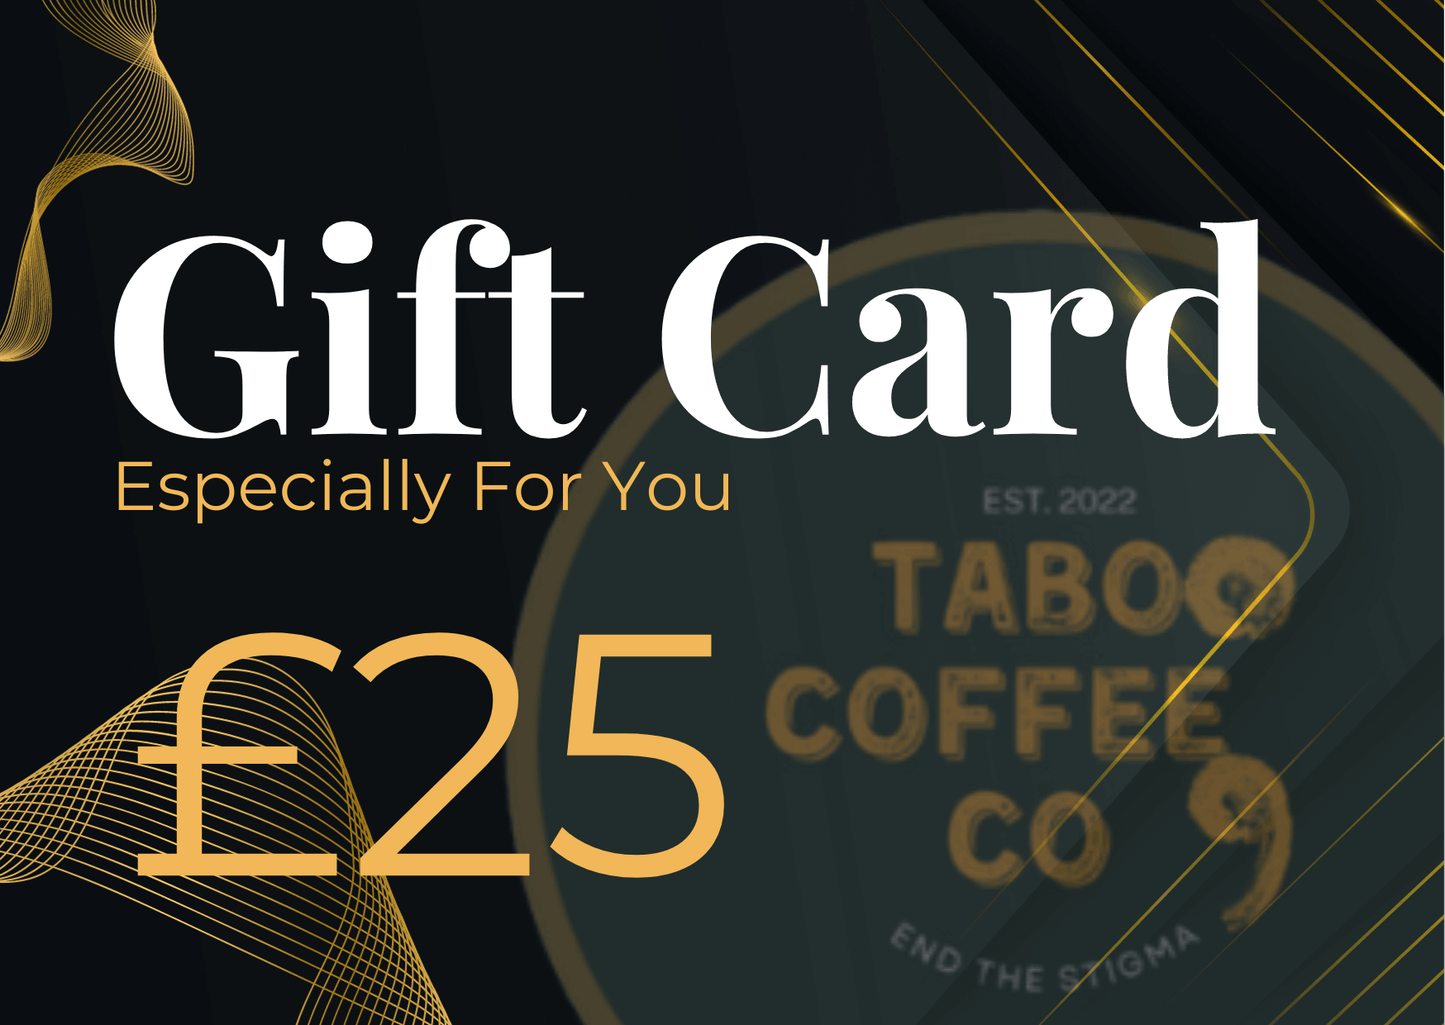 Taboo Coffee Co E-Gift Card £25: A digital gift card from Taboo Coffee Co, perfect for coffee enthusiasts. Use it to explore their delightful coffee blends and accessories. The e-gift card offers flexibility and convenience for recipients to choose their favourite items